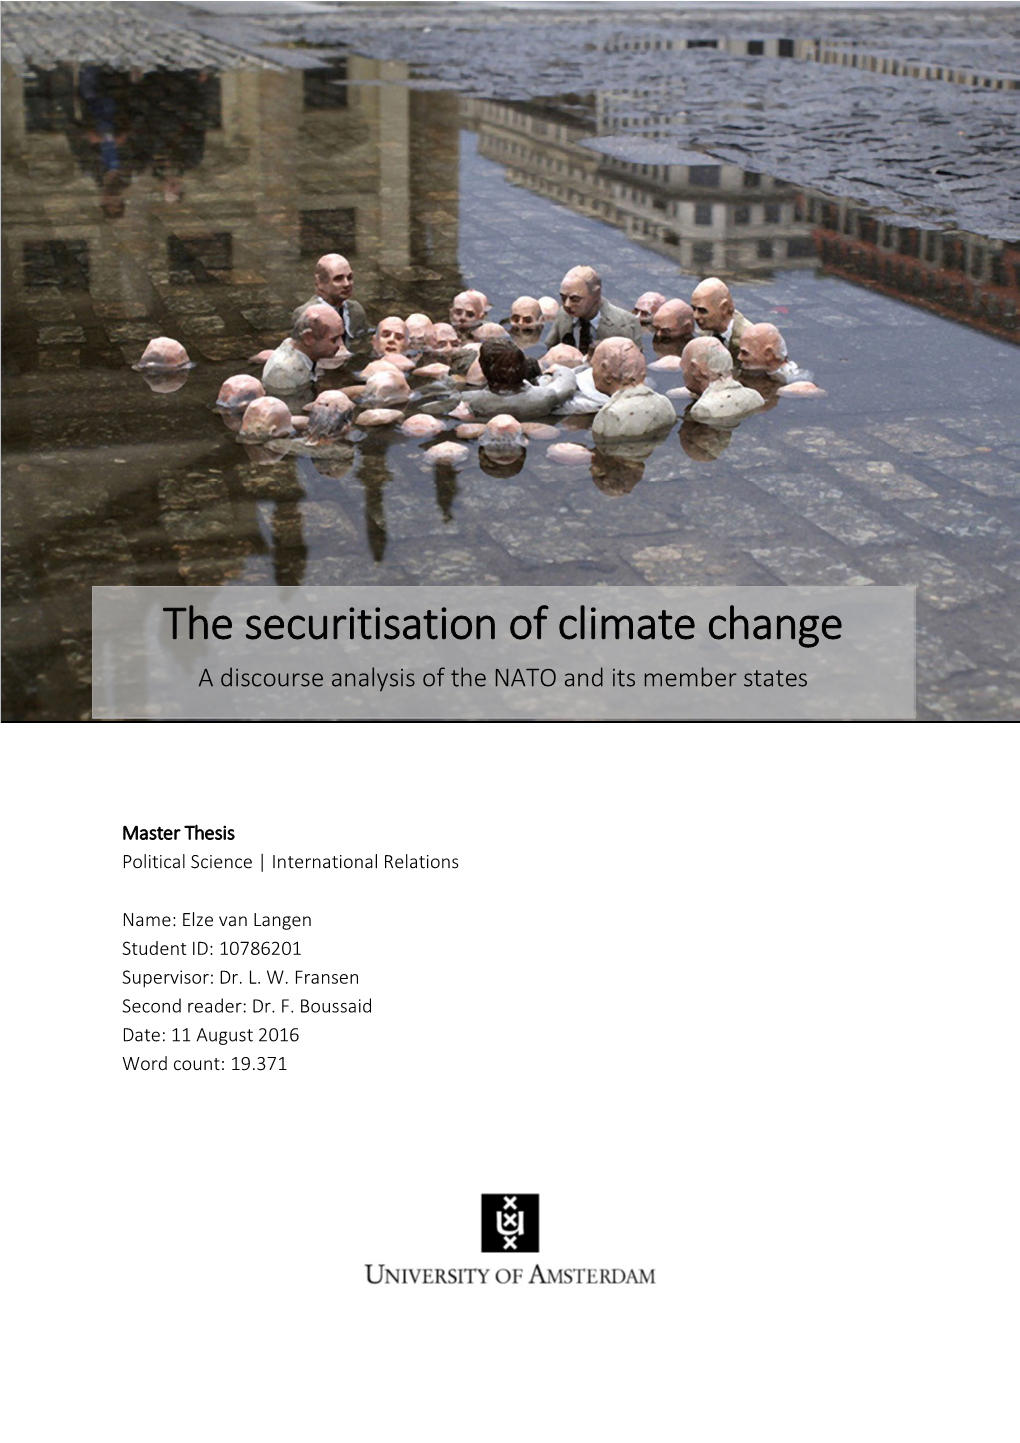 The Securitisation of Climate Change a Discourse Analysis of the NATO and Its Member States